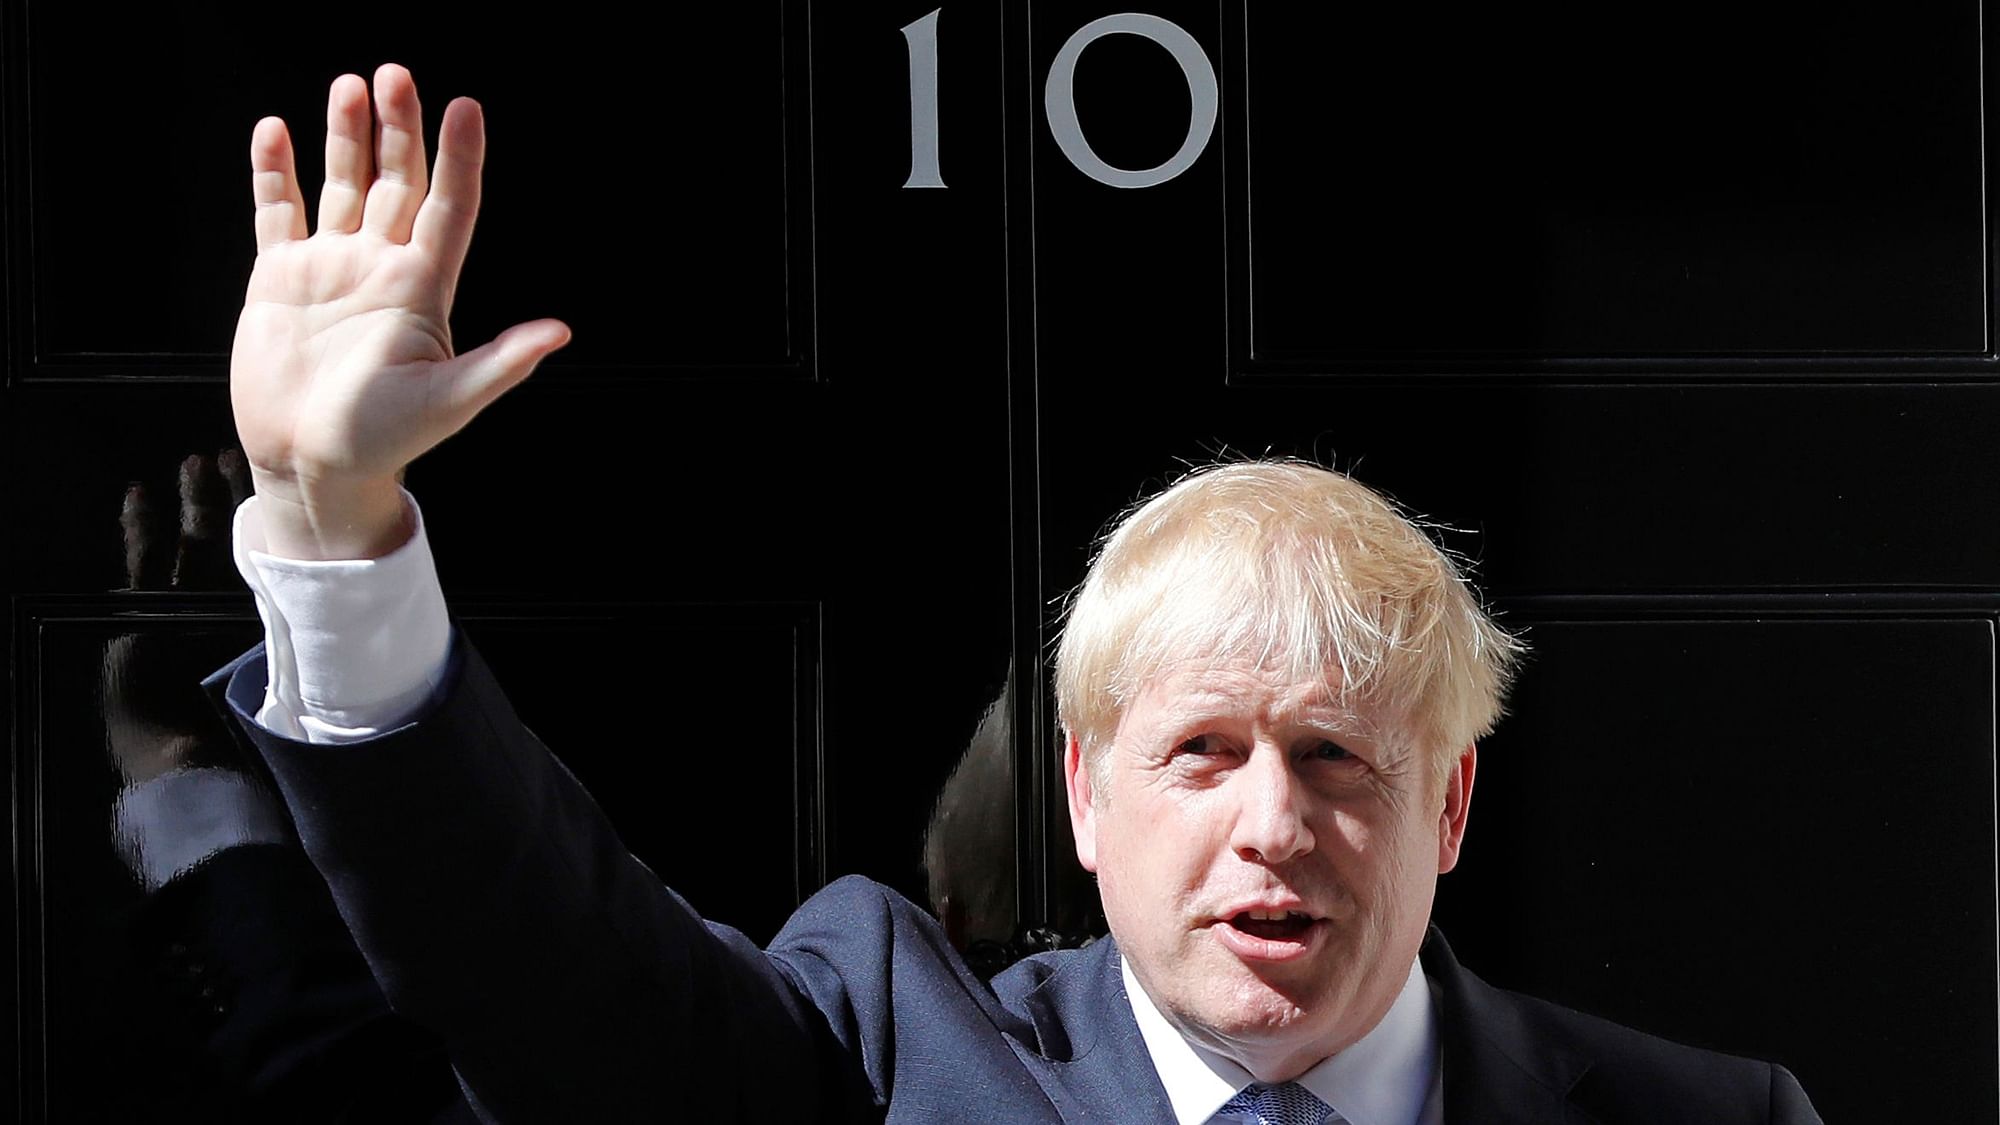 Britain’s new Prime Minister Boris Johnson waves from the steps outside 10 Downing Street, London.